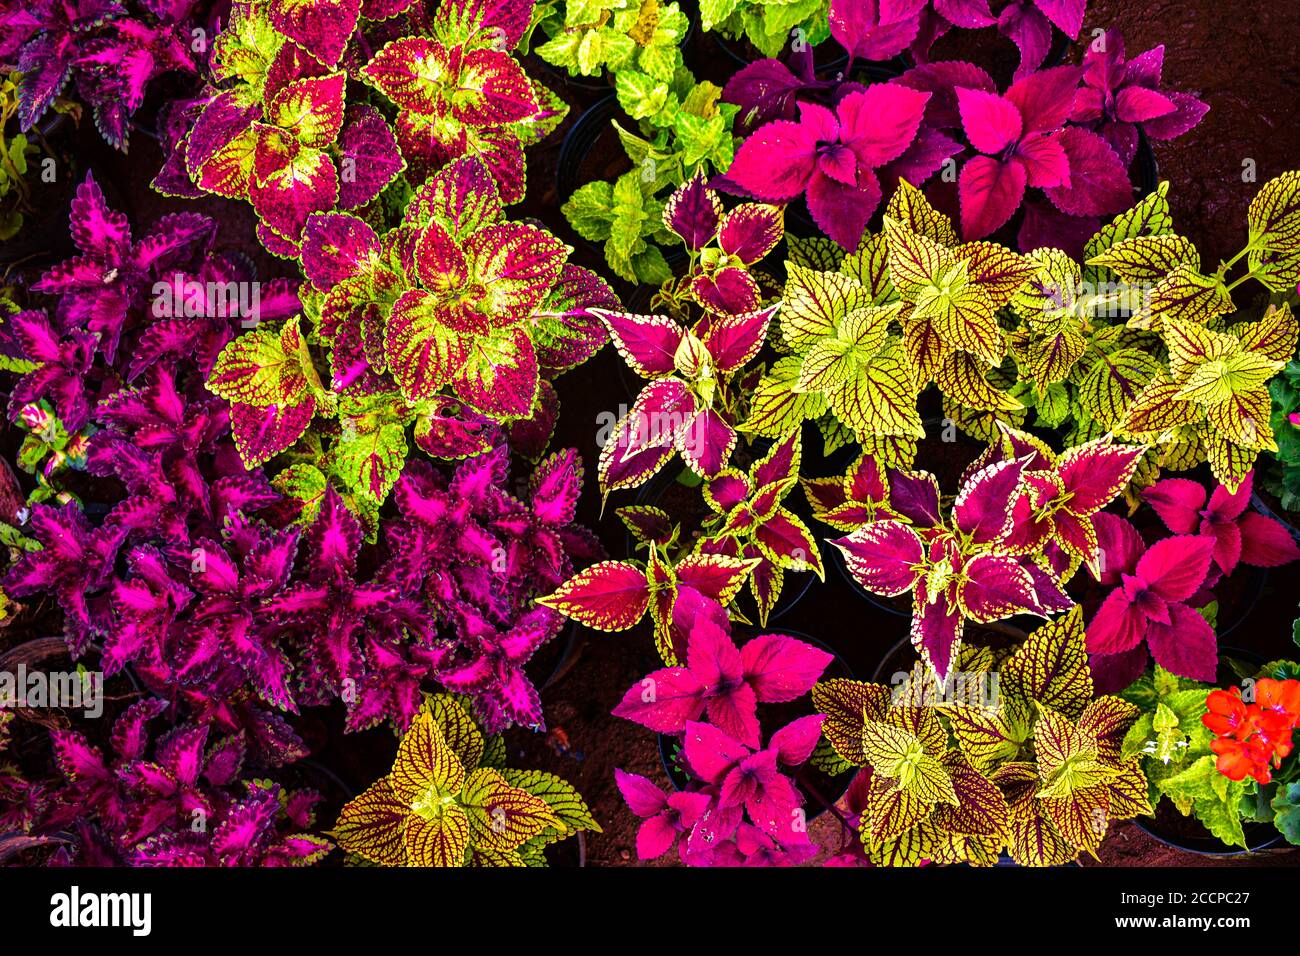 Colorful picture of different coleus leaves with borders of different colors making it the best background Stock Photo